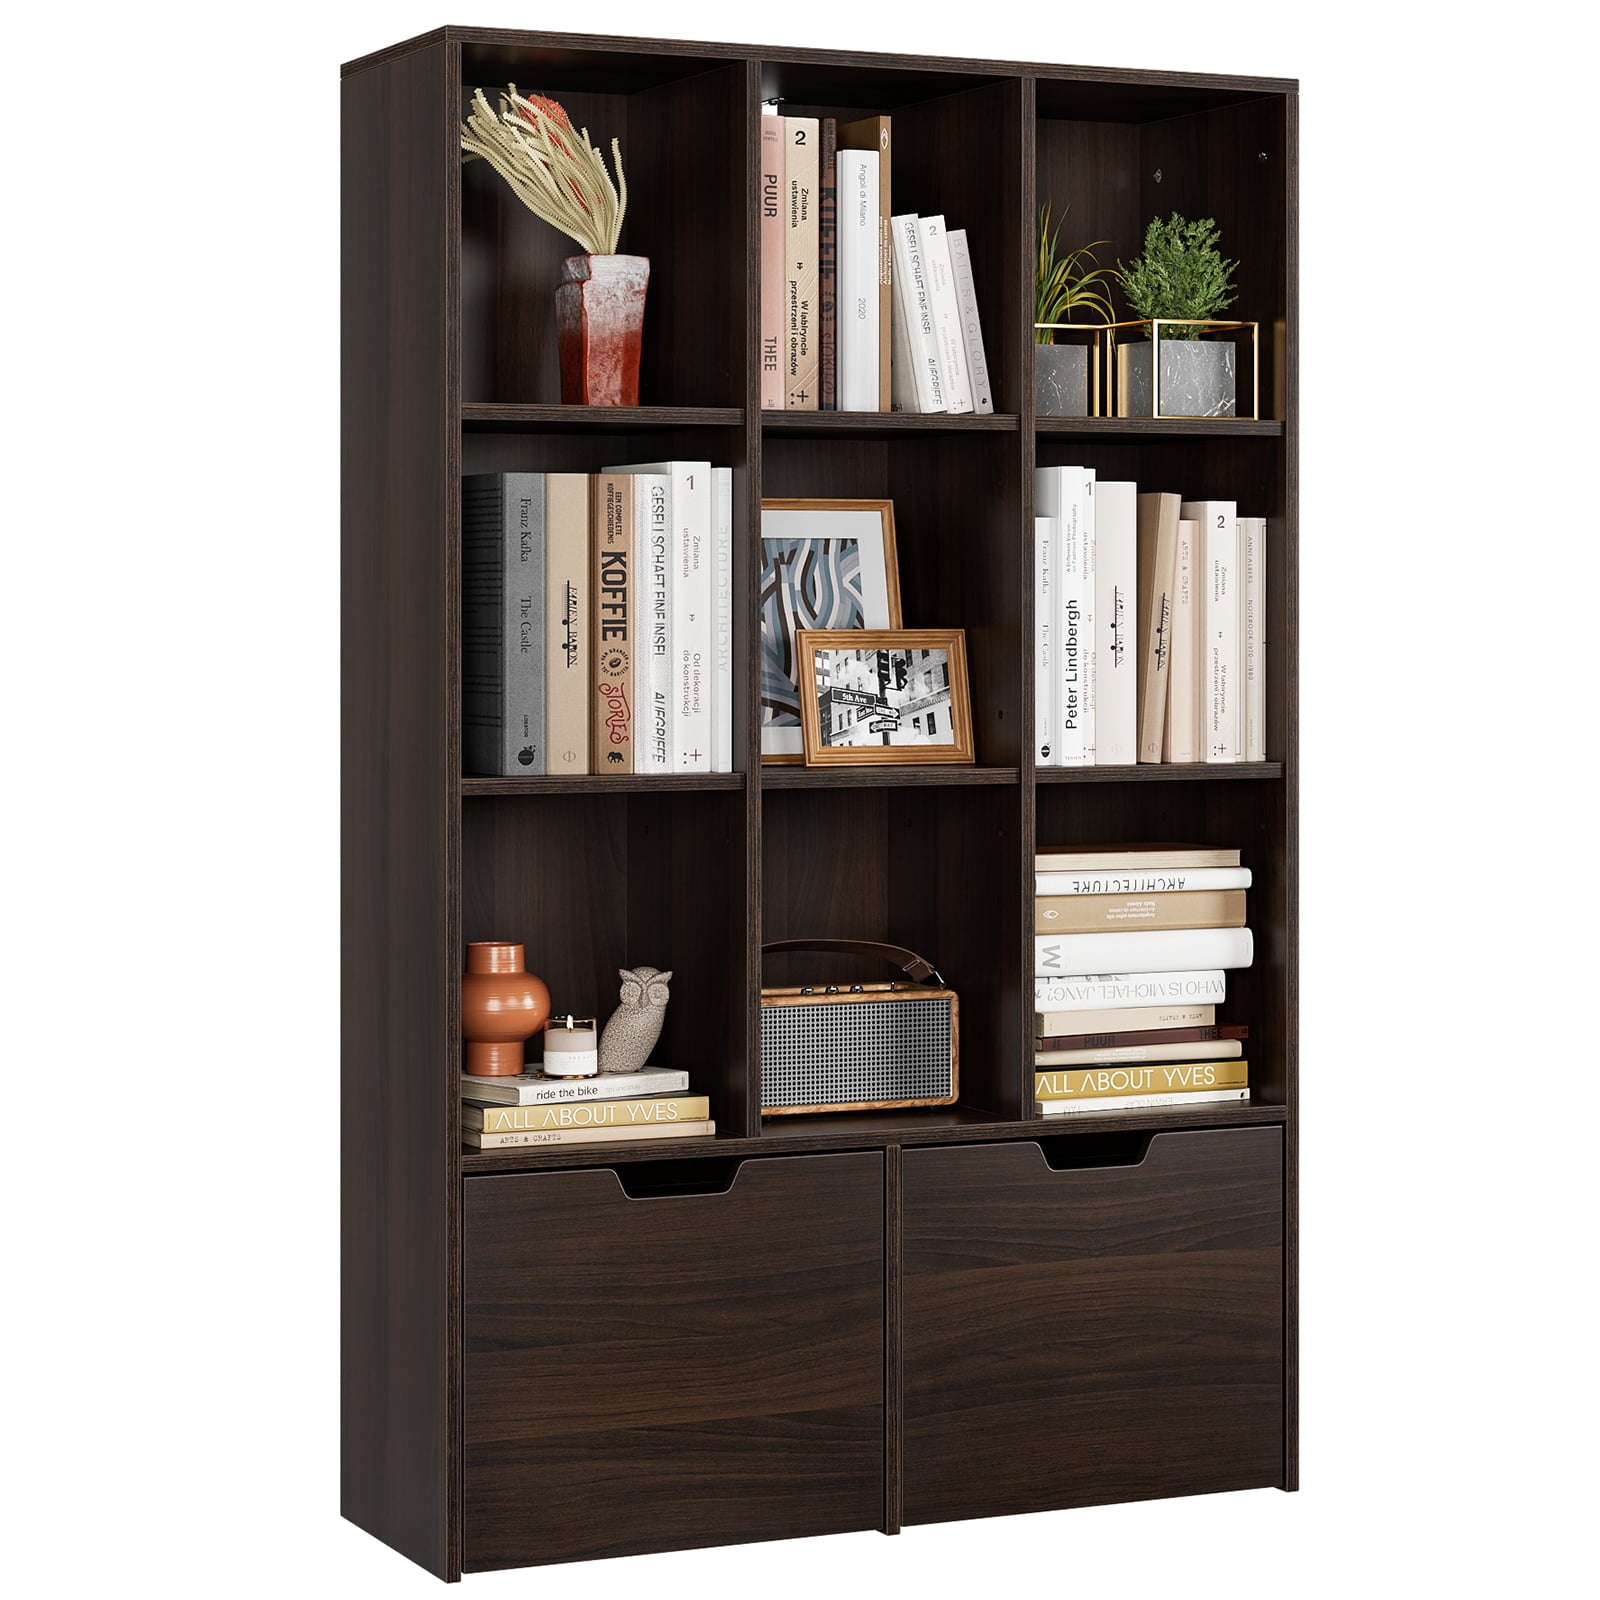 Wooden Bookshelf，Bookcase with Draws，Book Shelf for Bedroom Office Living Room Kids Adults，Storage Cabinet for Kitchen，Pantry，Dining Room Bar 11.8